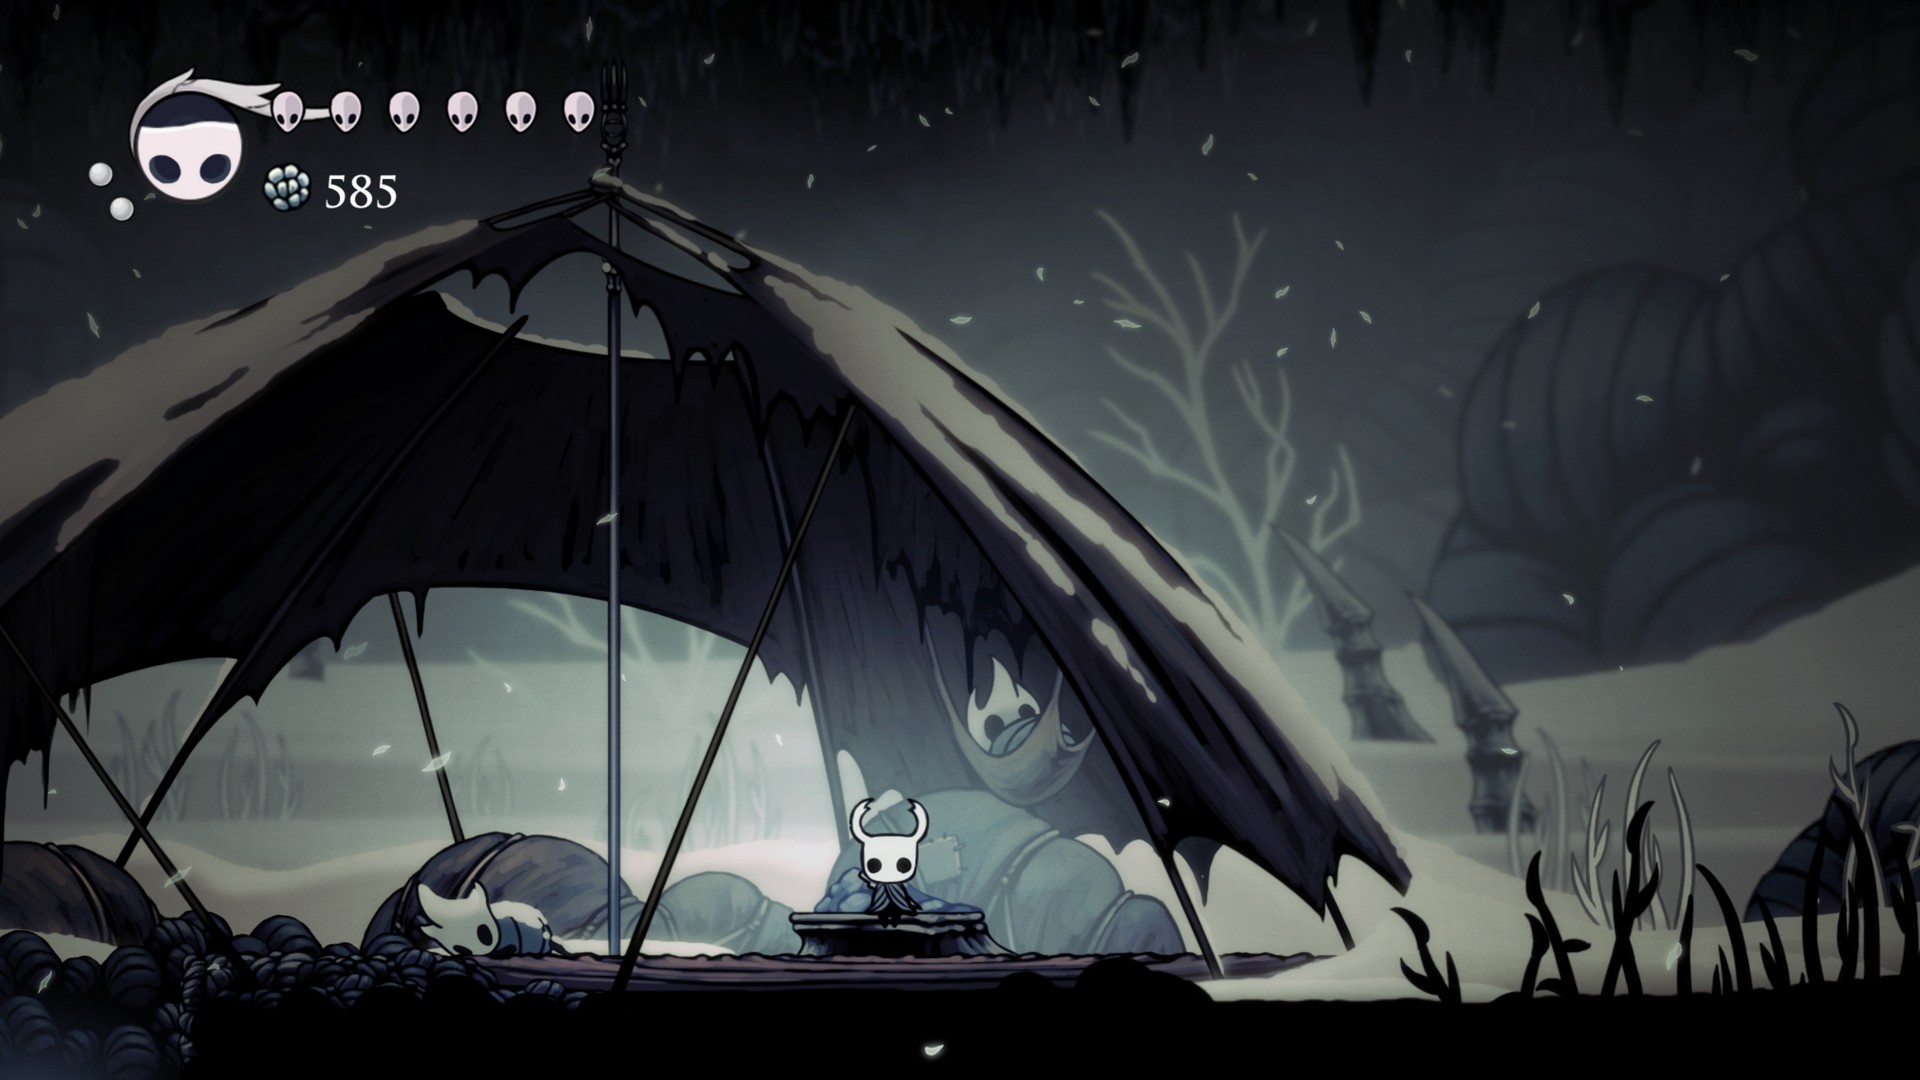 Hollow Knight Gameplay Wallpaper For Desktop With high-resolution 1920X1080 pixel. You can use this wallpaper for your Windows and Mac OS computers as well as your Android and iPhone smartphones